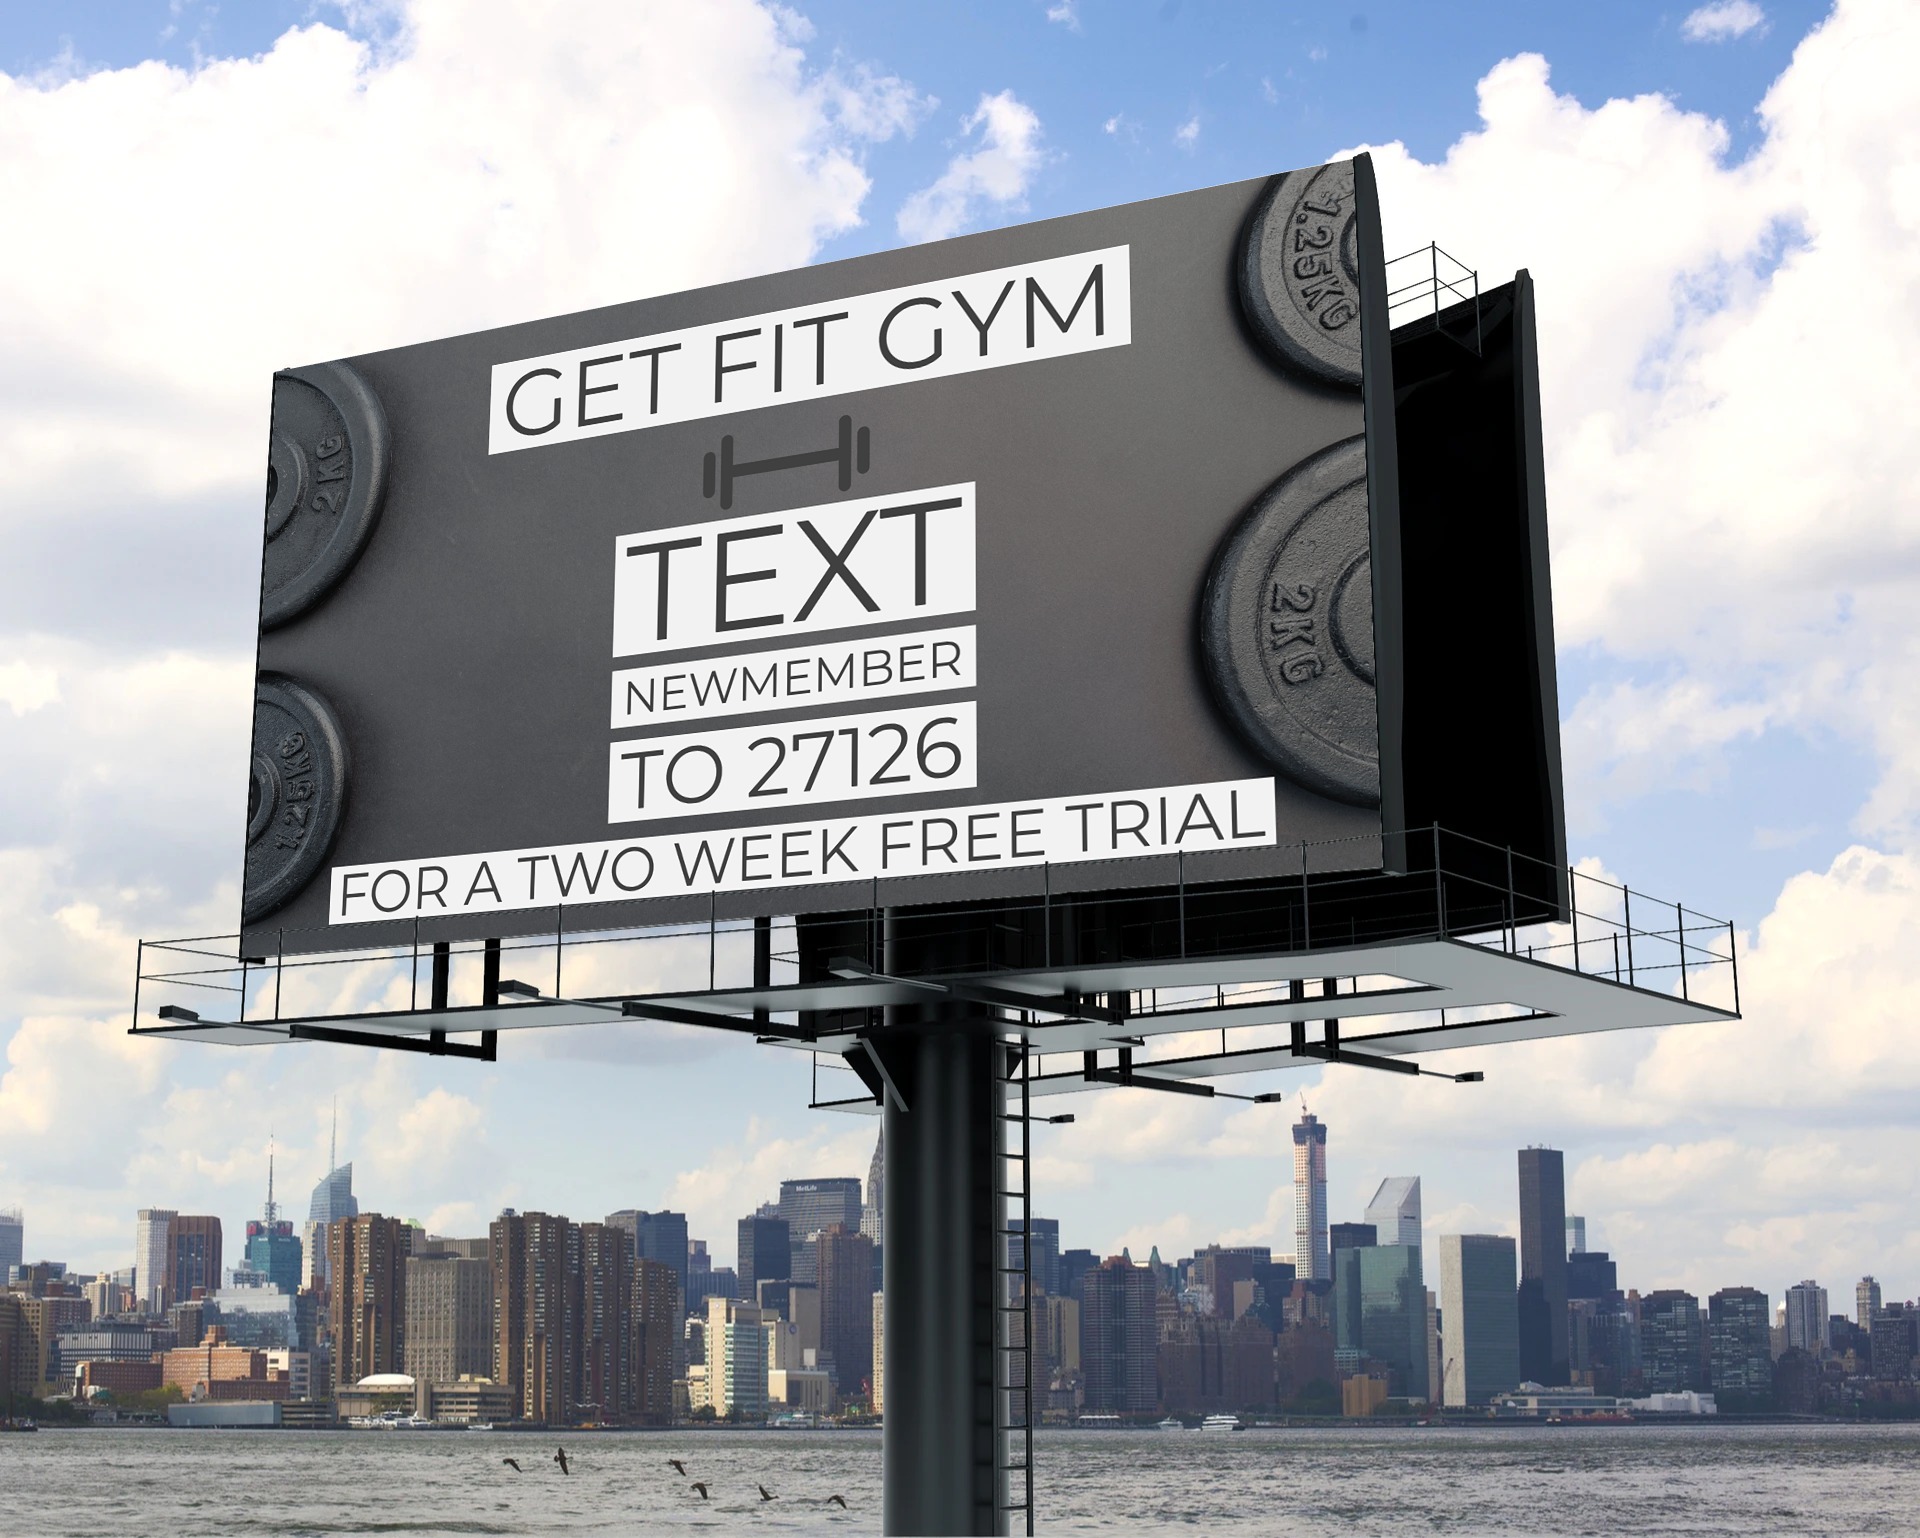 Workout Word Cloud Image & Photo (Free Trial)